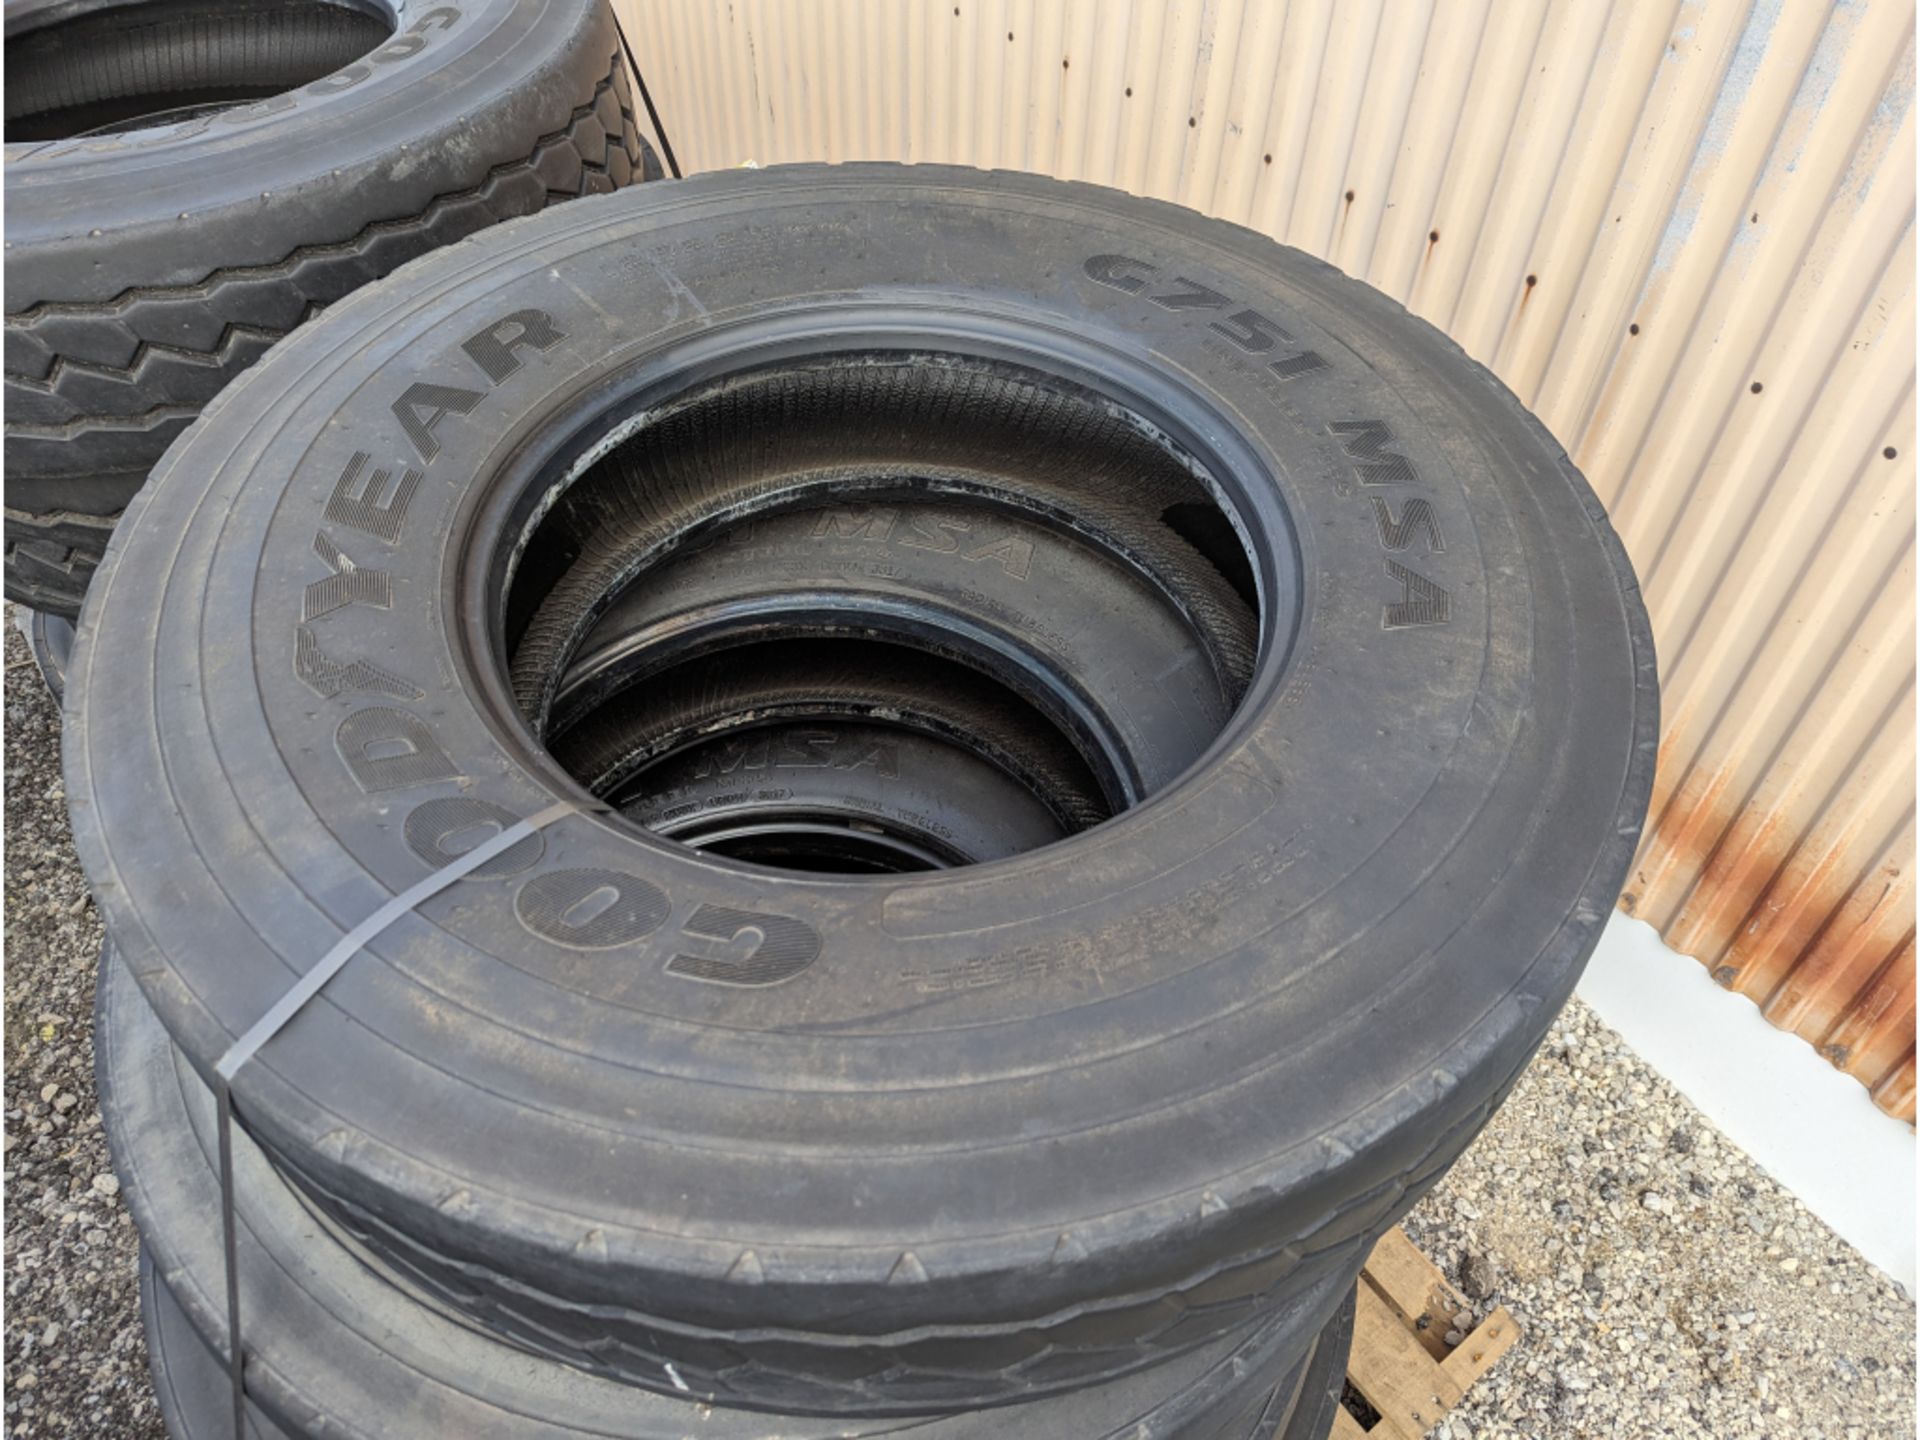 (4) Goodyear G751 MSA 12R22.5 commercial truck tires USED Virgin Tread Surplus Take Off - Image 4 of 4